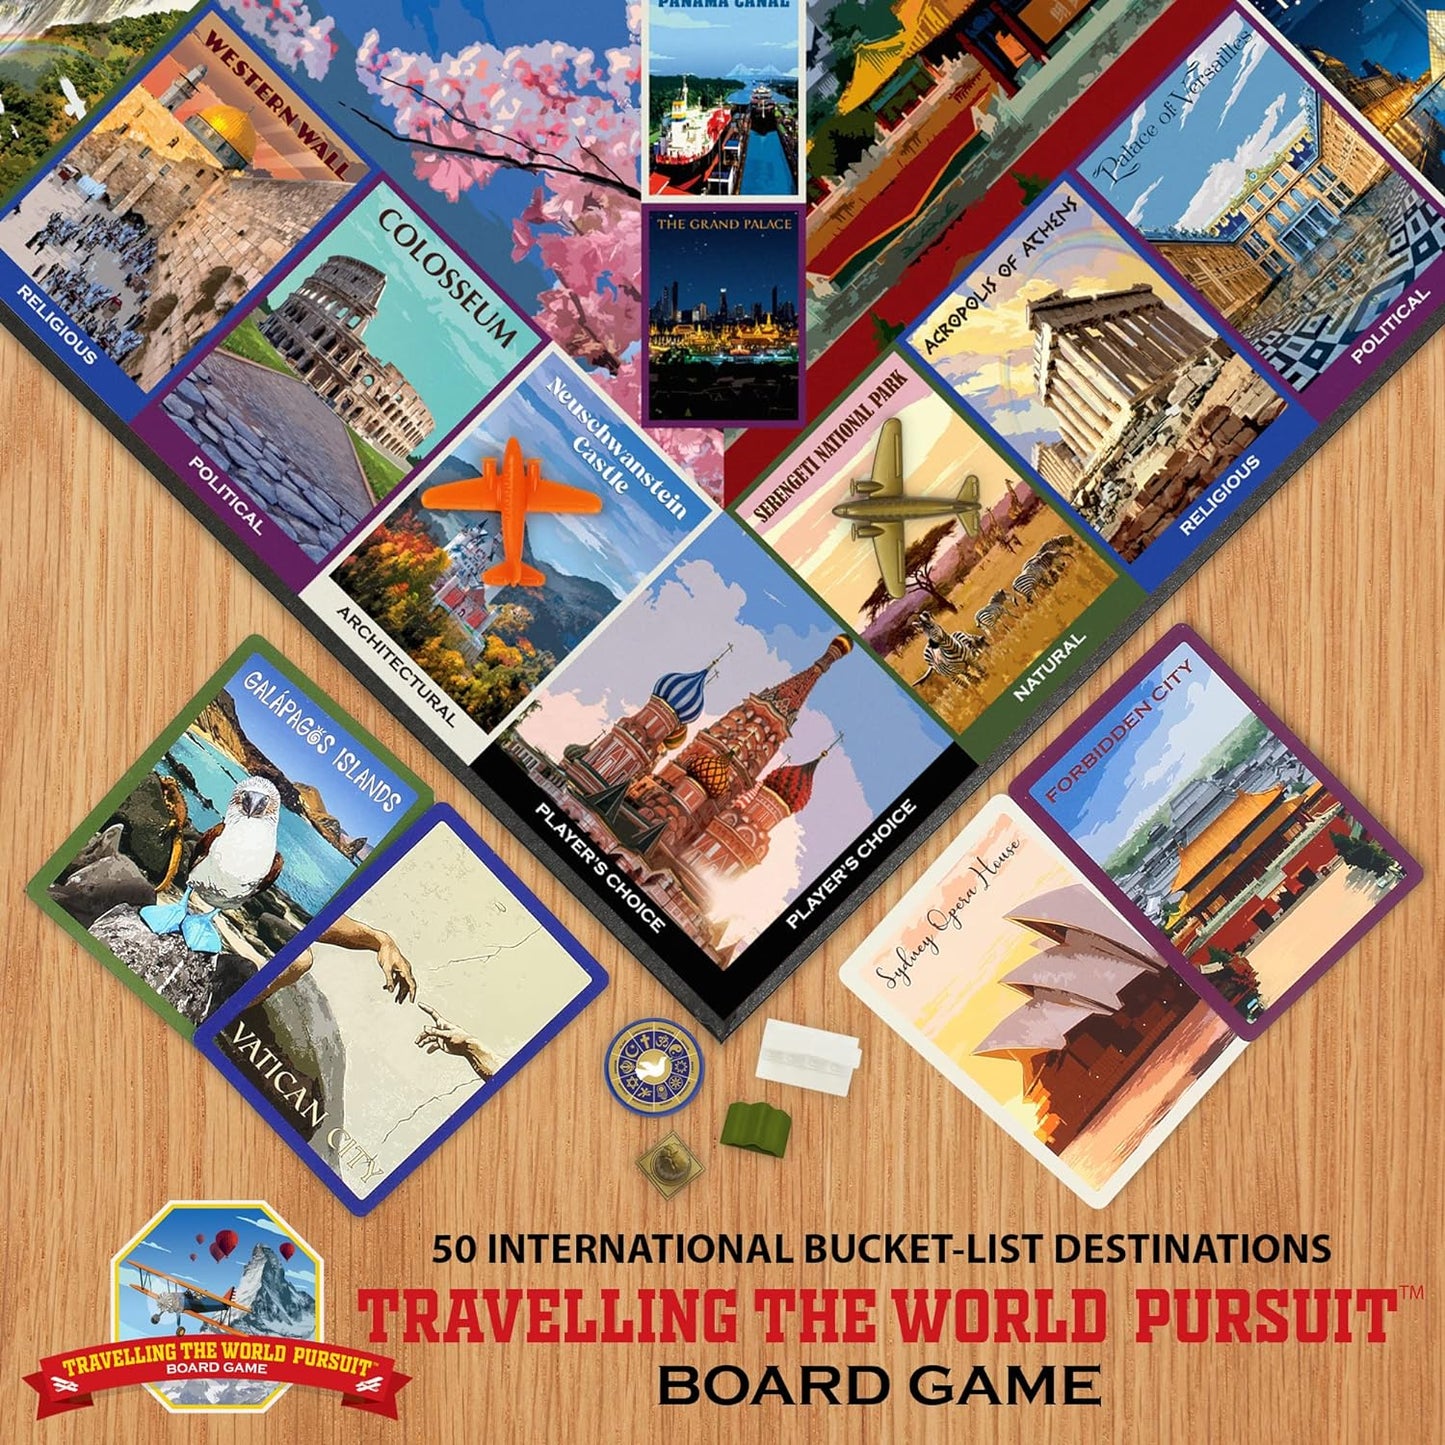 TRAVELLING THE WORLD PURSUIT BOARD GAME